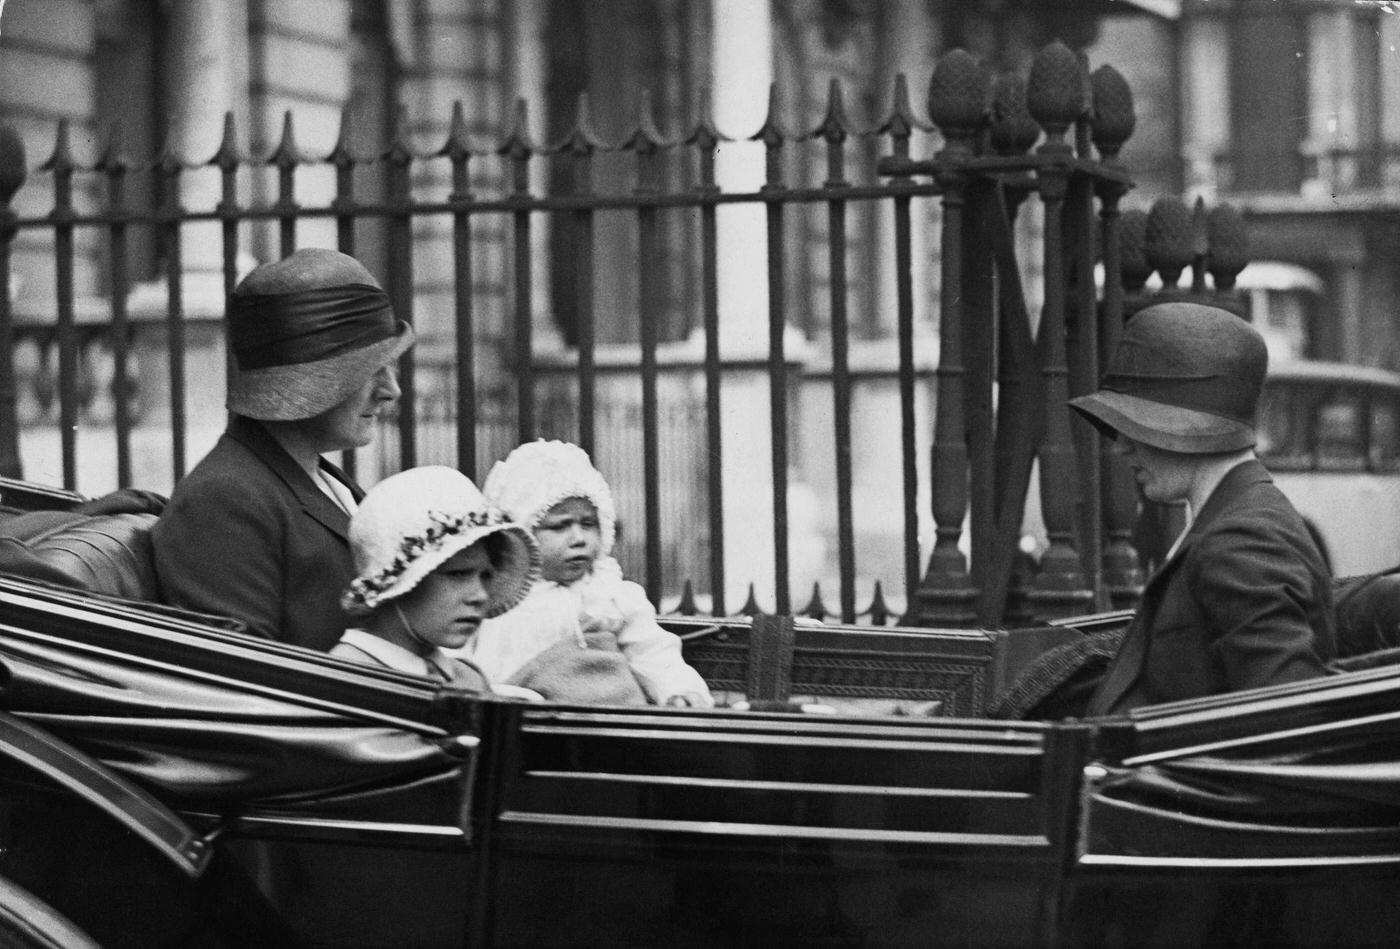 Princess Elizabeth and Princess Margaret ride with their nanny, possibly Clara Knight, for a drive in a carriage from their house in Piccadilly, London on 22nd July 1931.